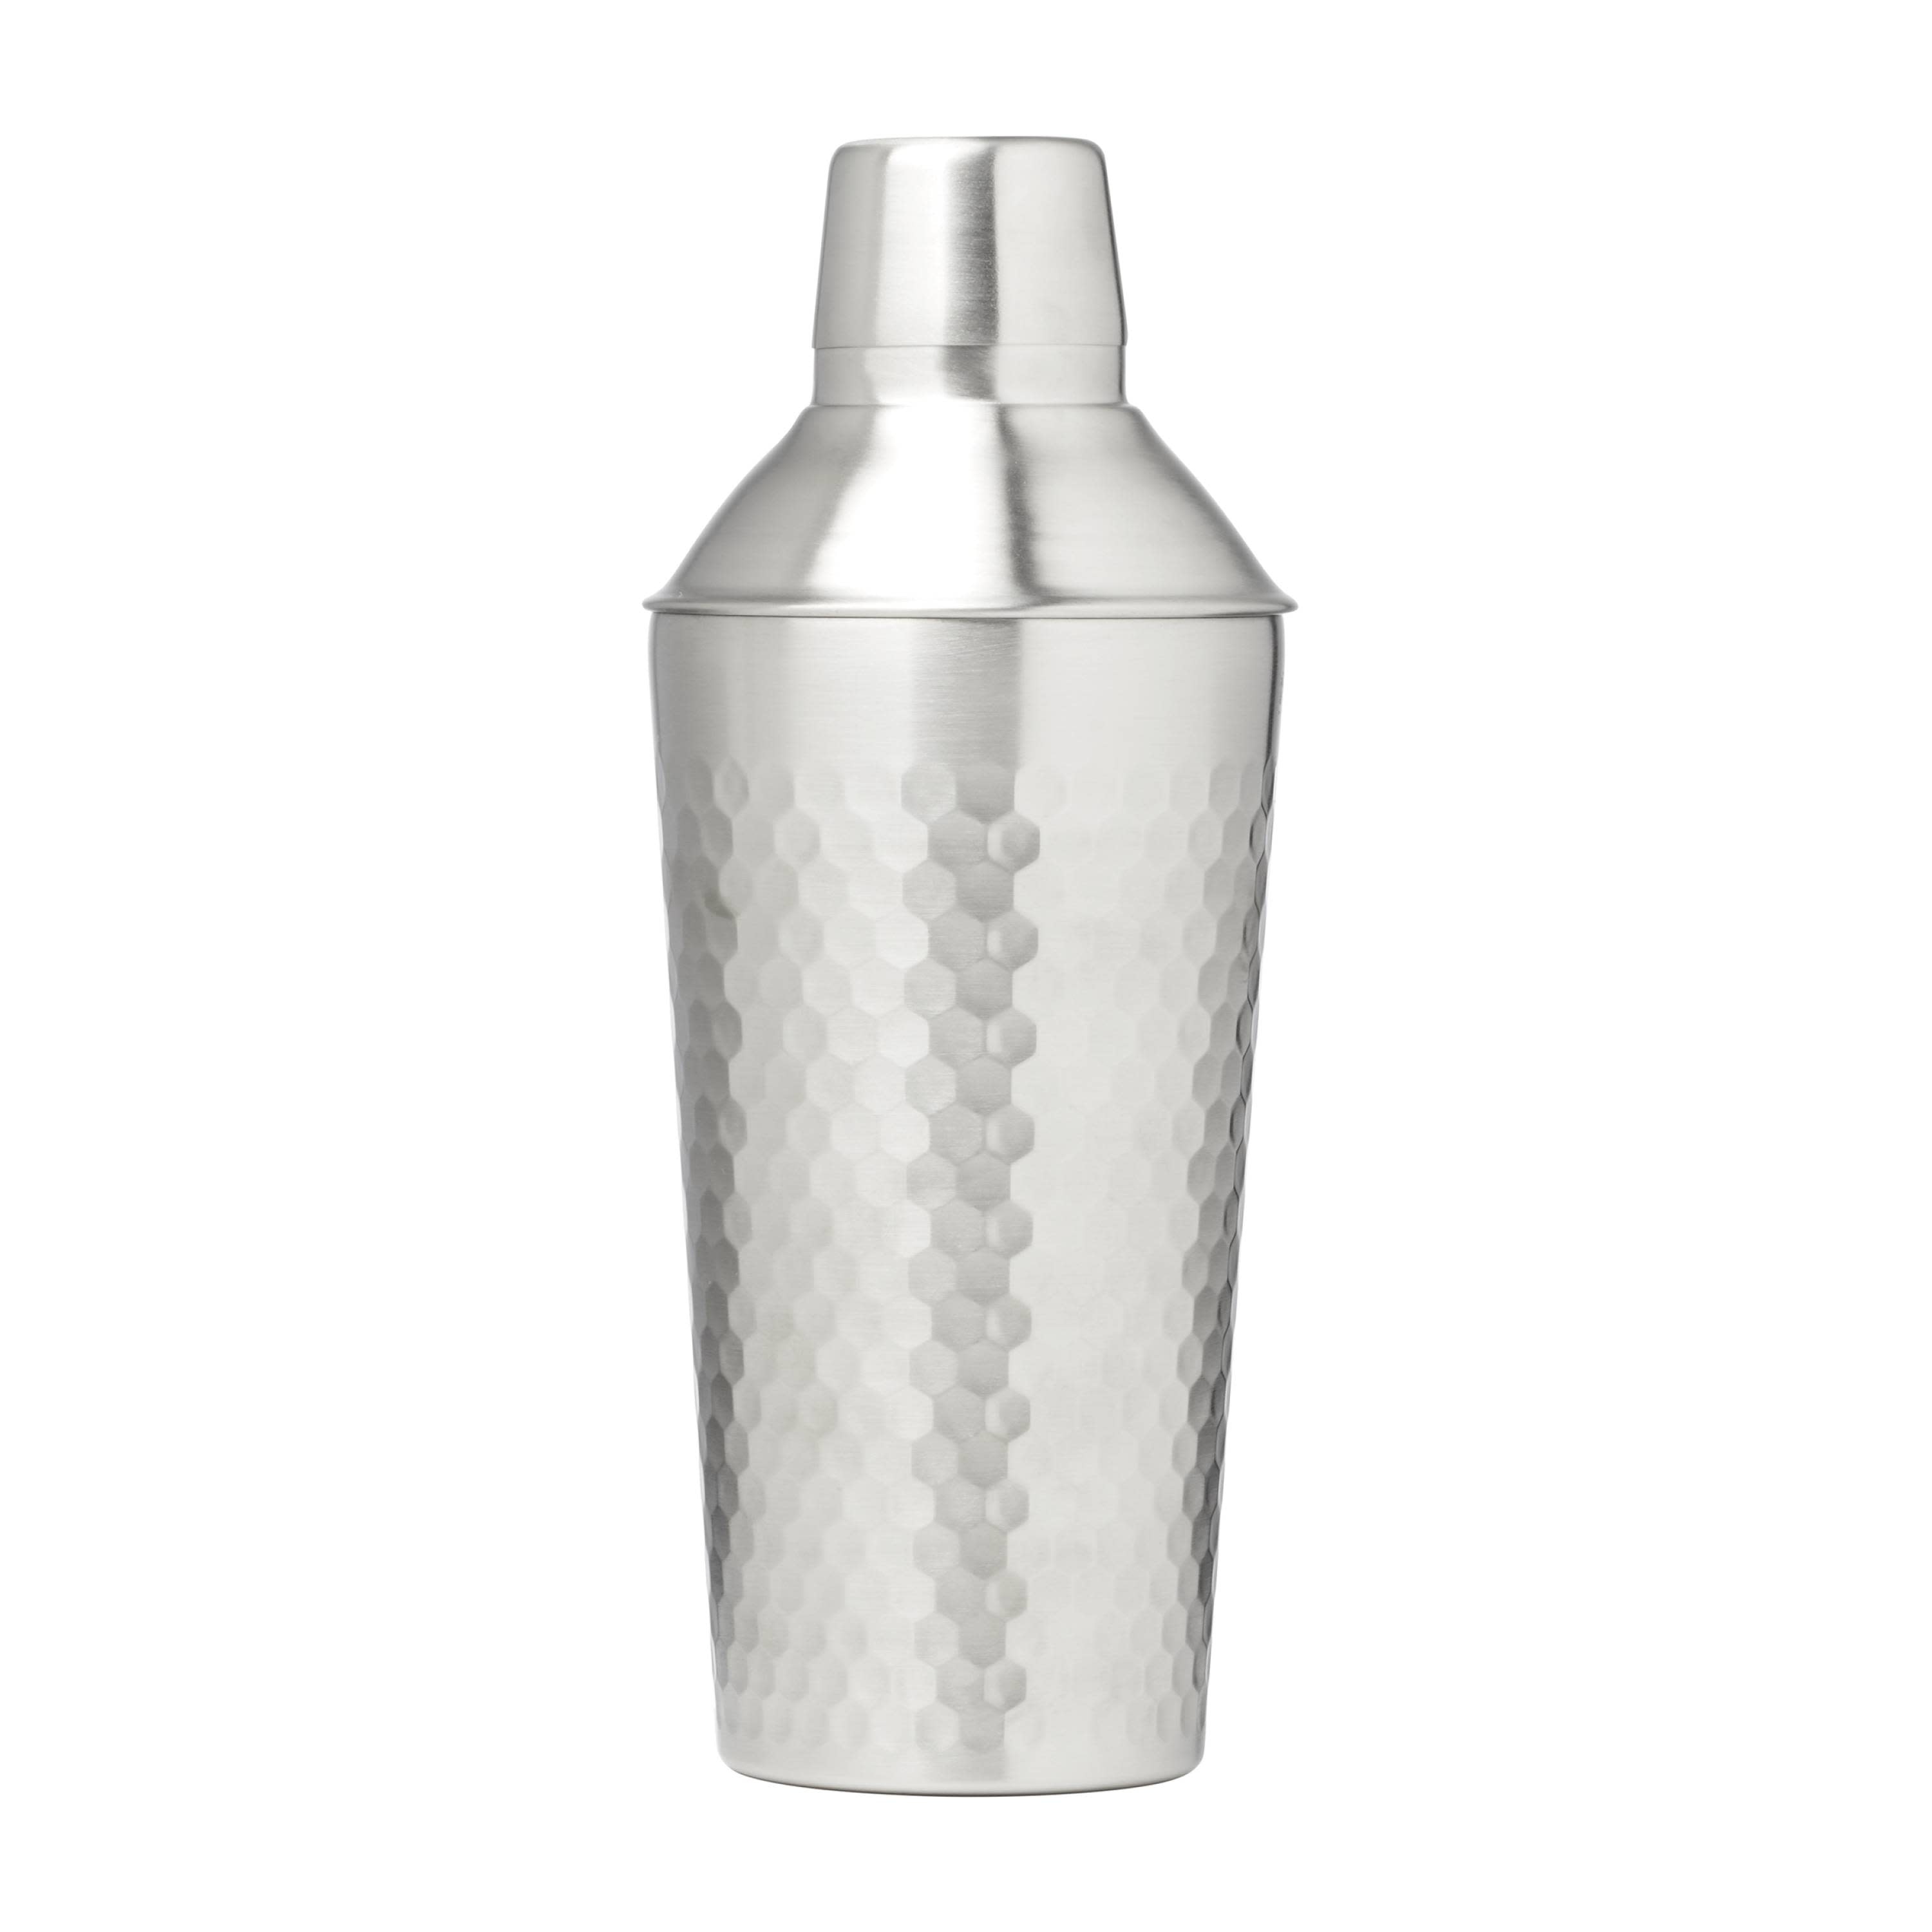 https://ak1.ostkcdn.com/images/products/is/images/direct/80a030fdbbec031b1c772814608ed6291feded24/20oz-Stainless-Steel-Faceted-Double-Wall-Shaker.jpg